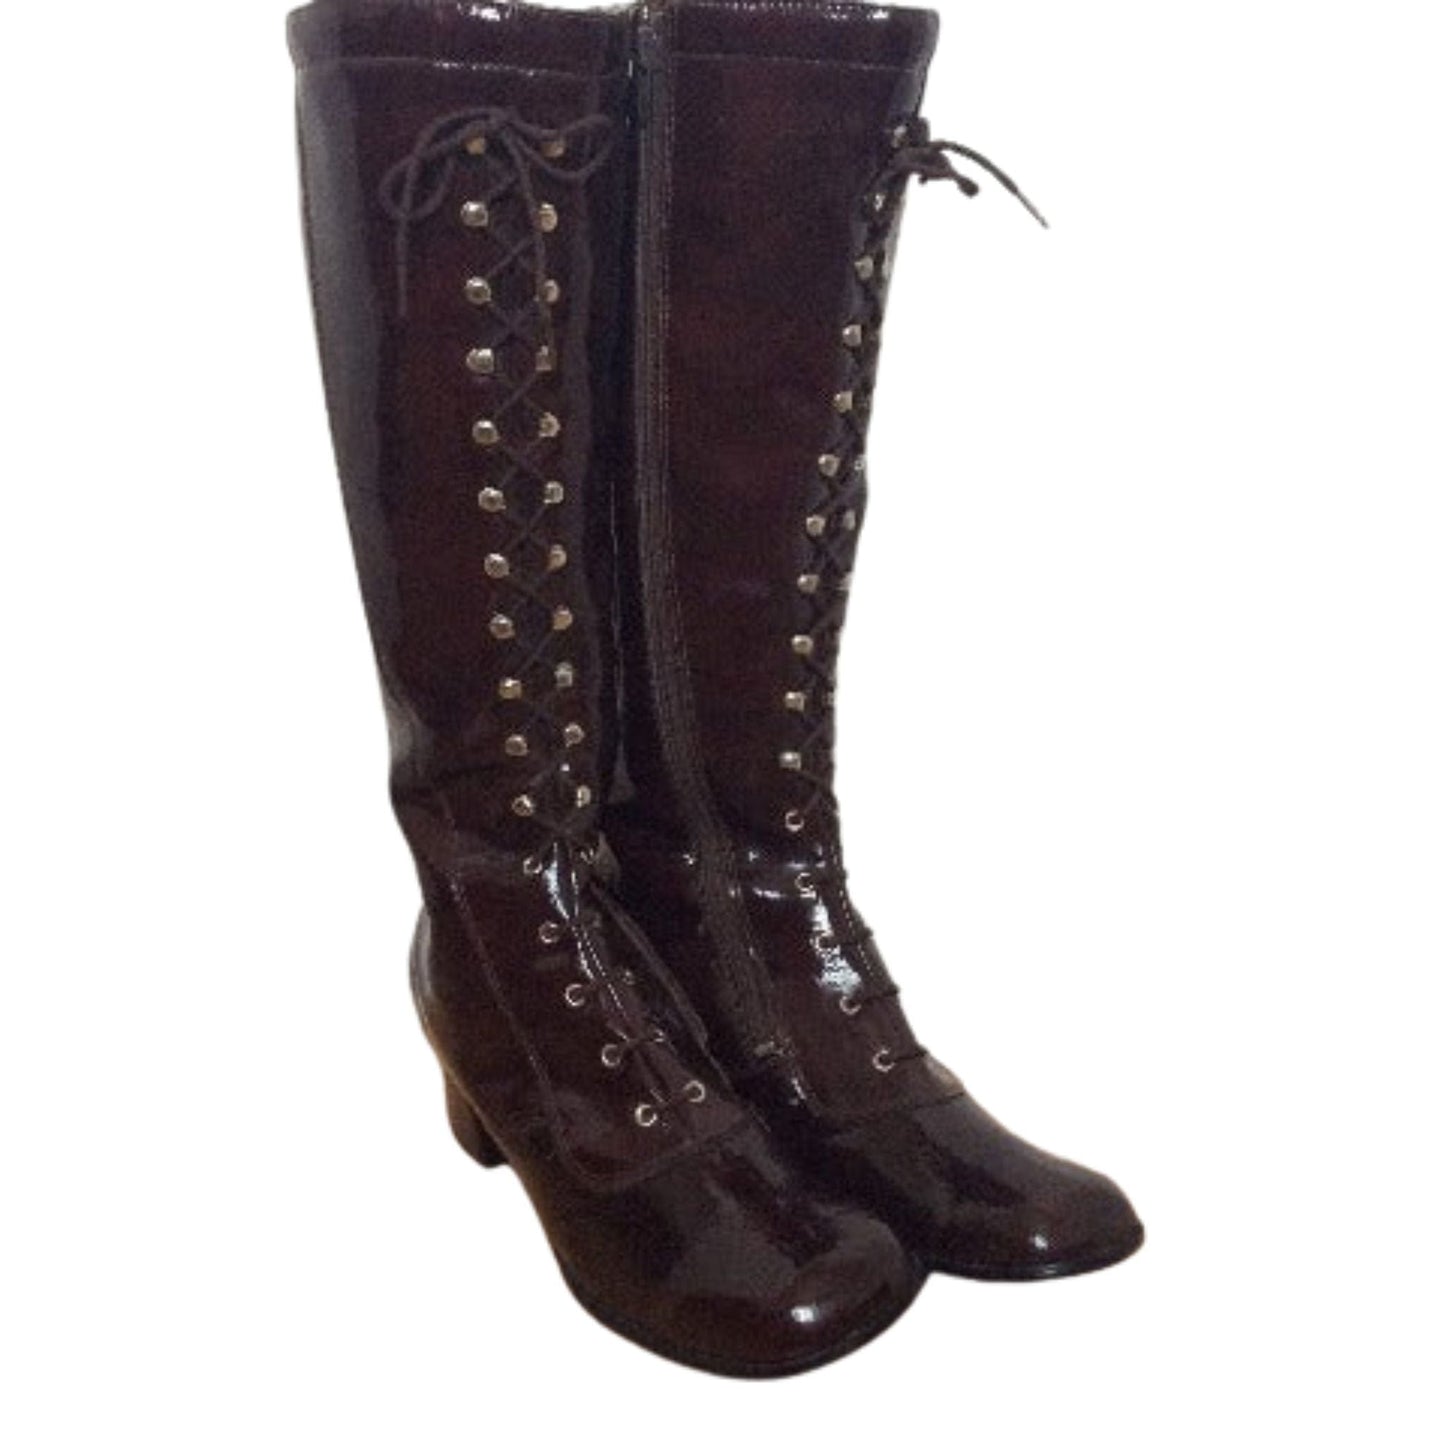 1960s Fashion Boots 8.5 / Brown / Vintage 1960s